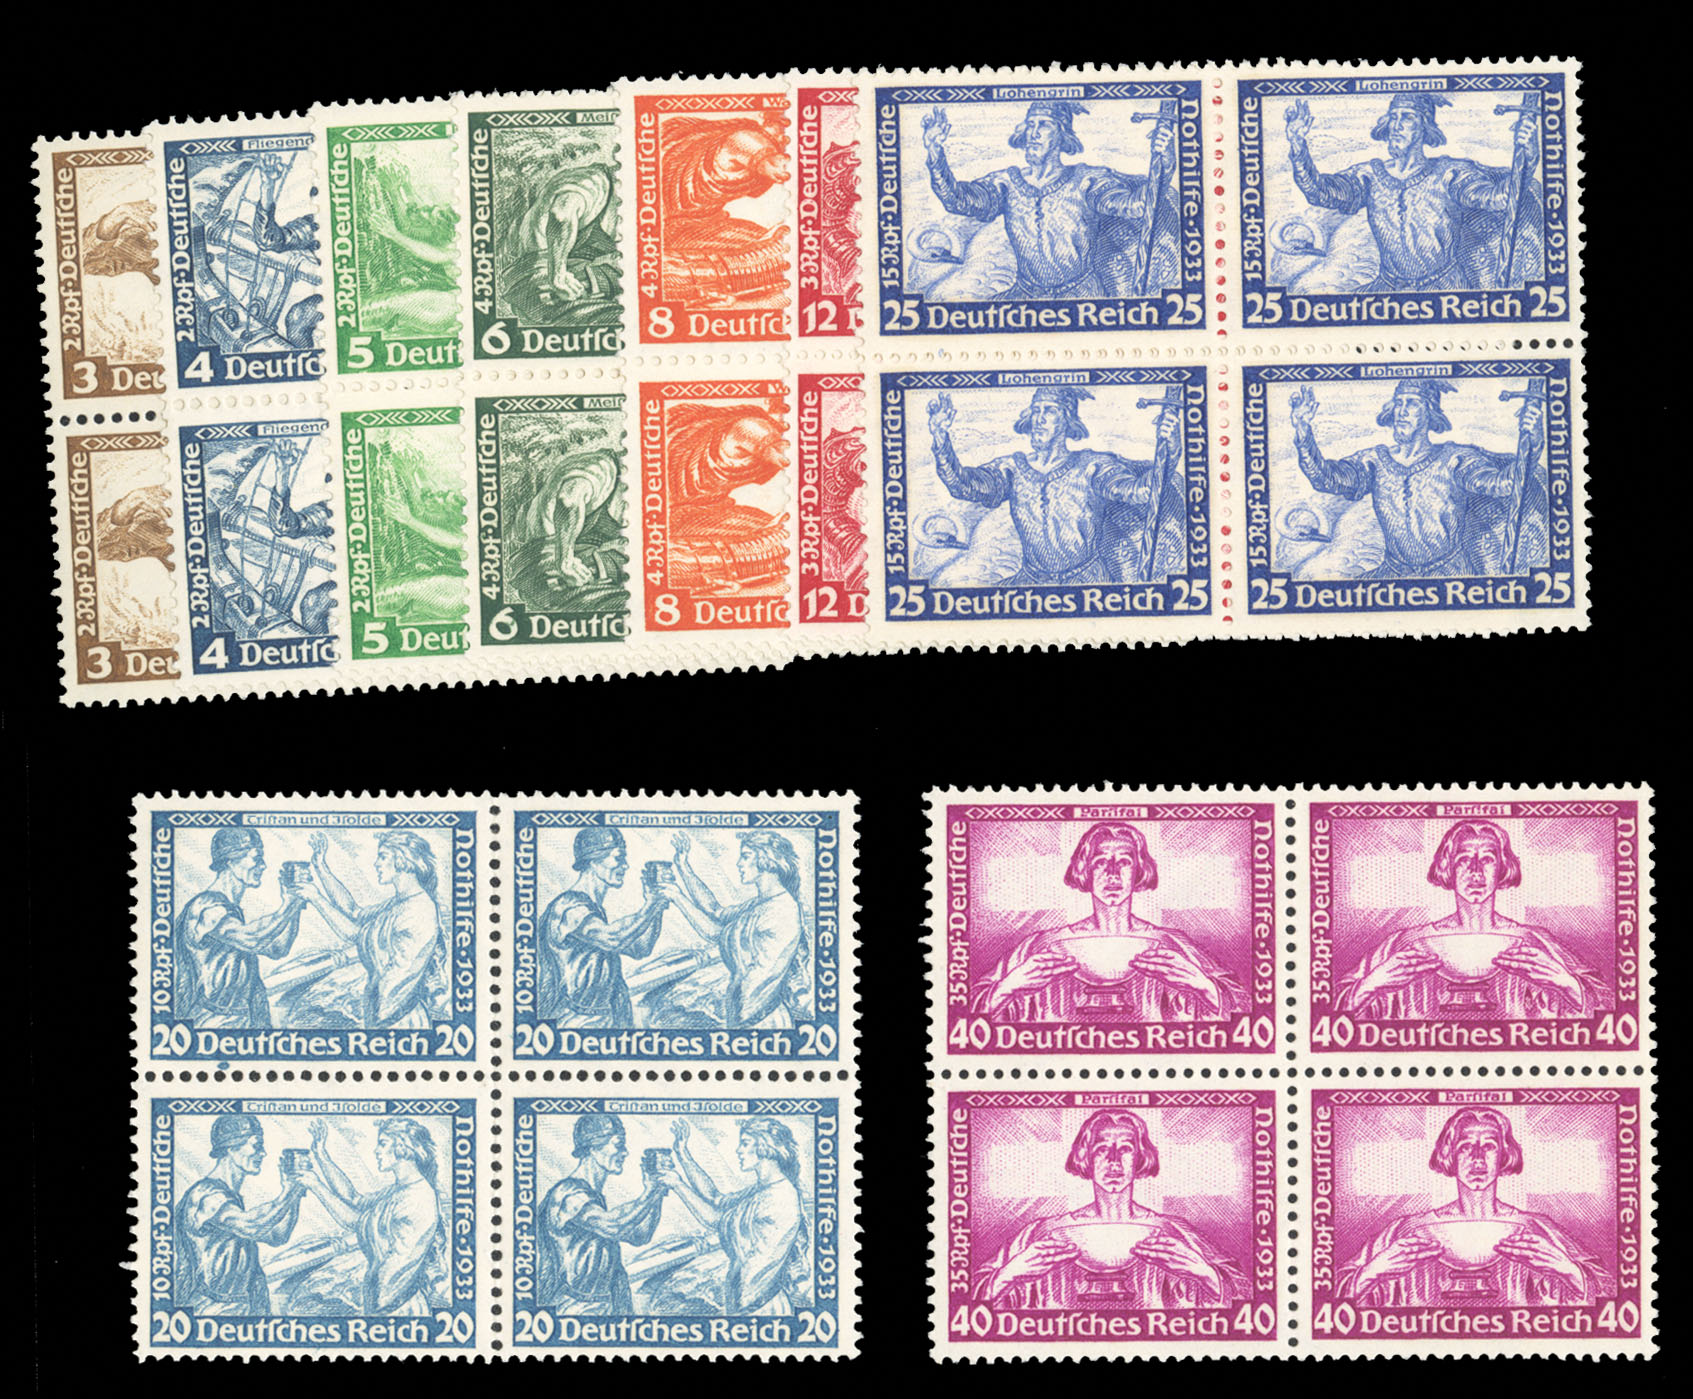 Lot 548 - GERMAN COLONIES German Offices in the Turkish Empire  -  Cherrystone Auctions U.S. & Worldwide Stamps & Postal History